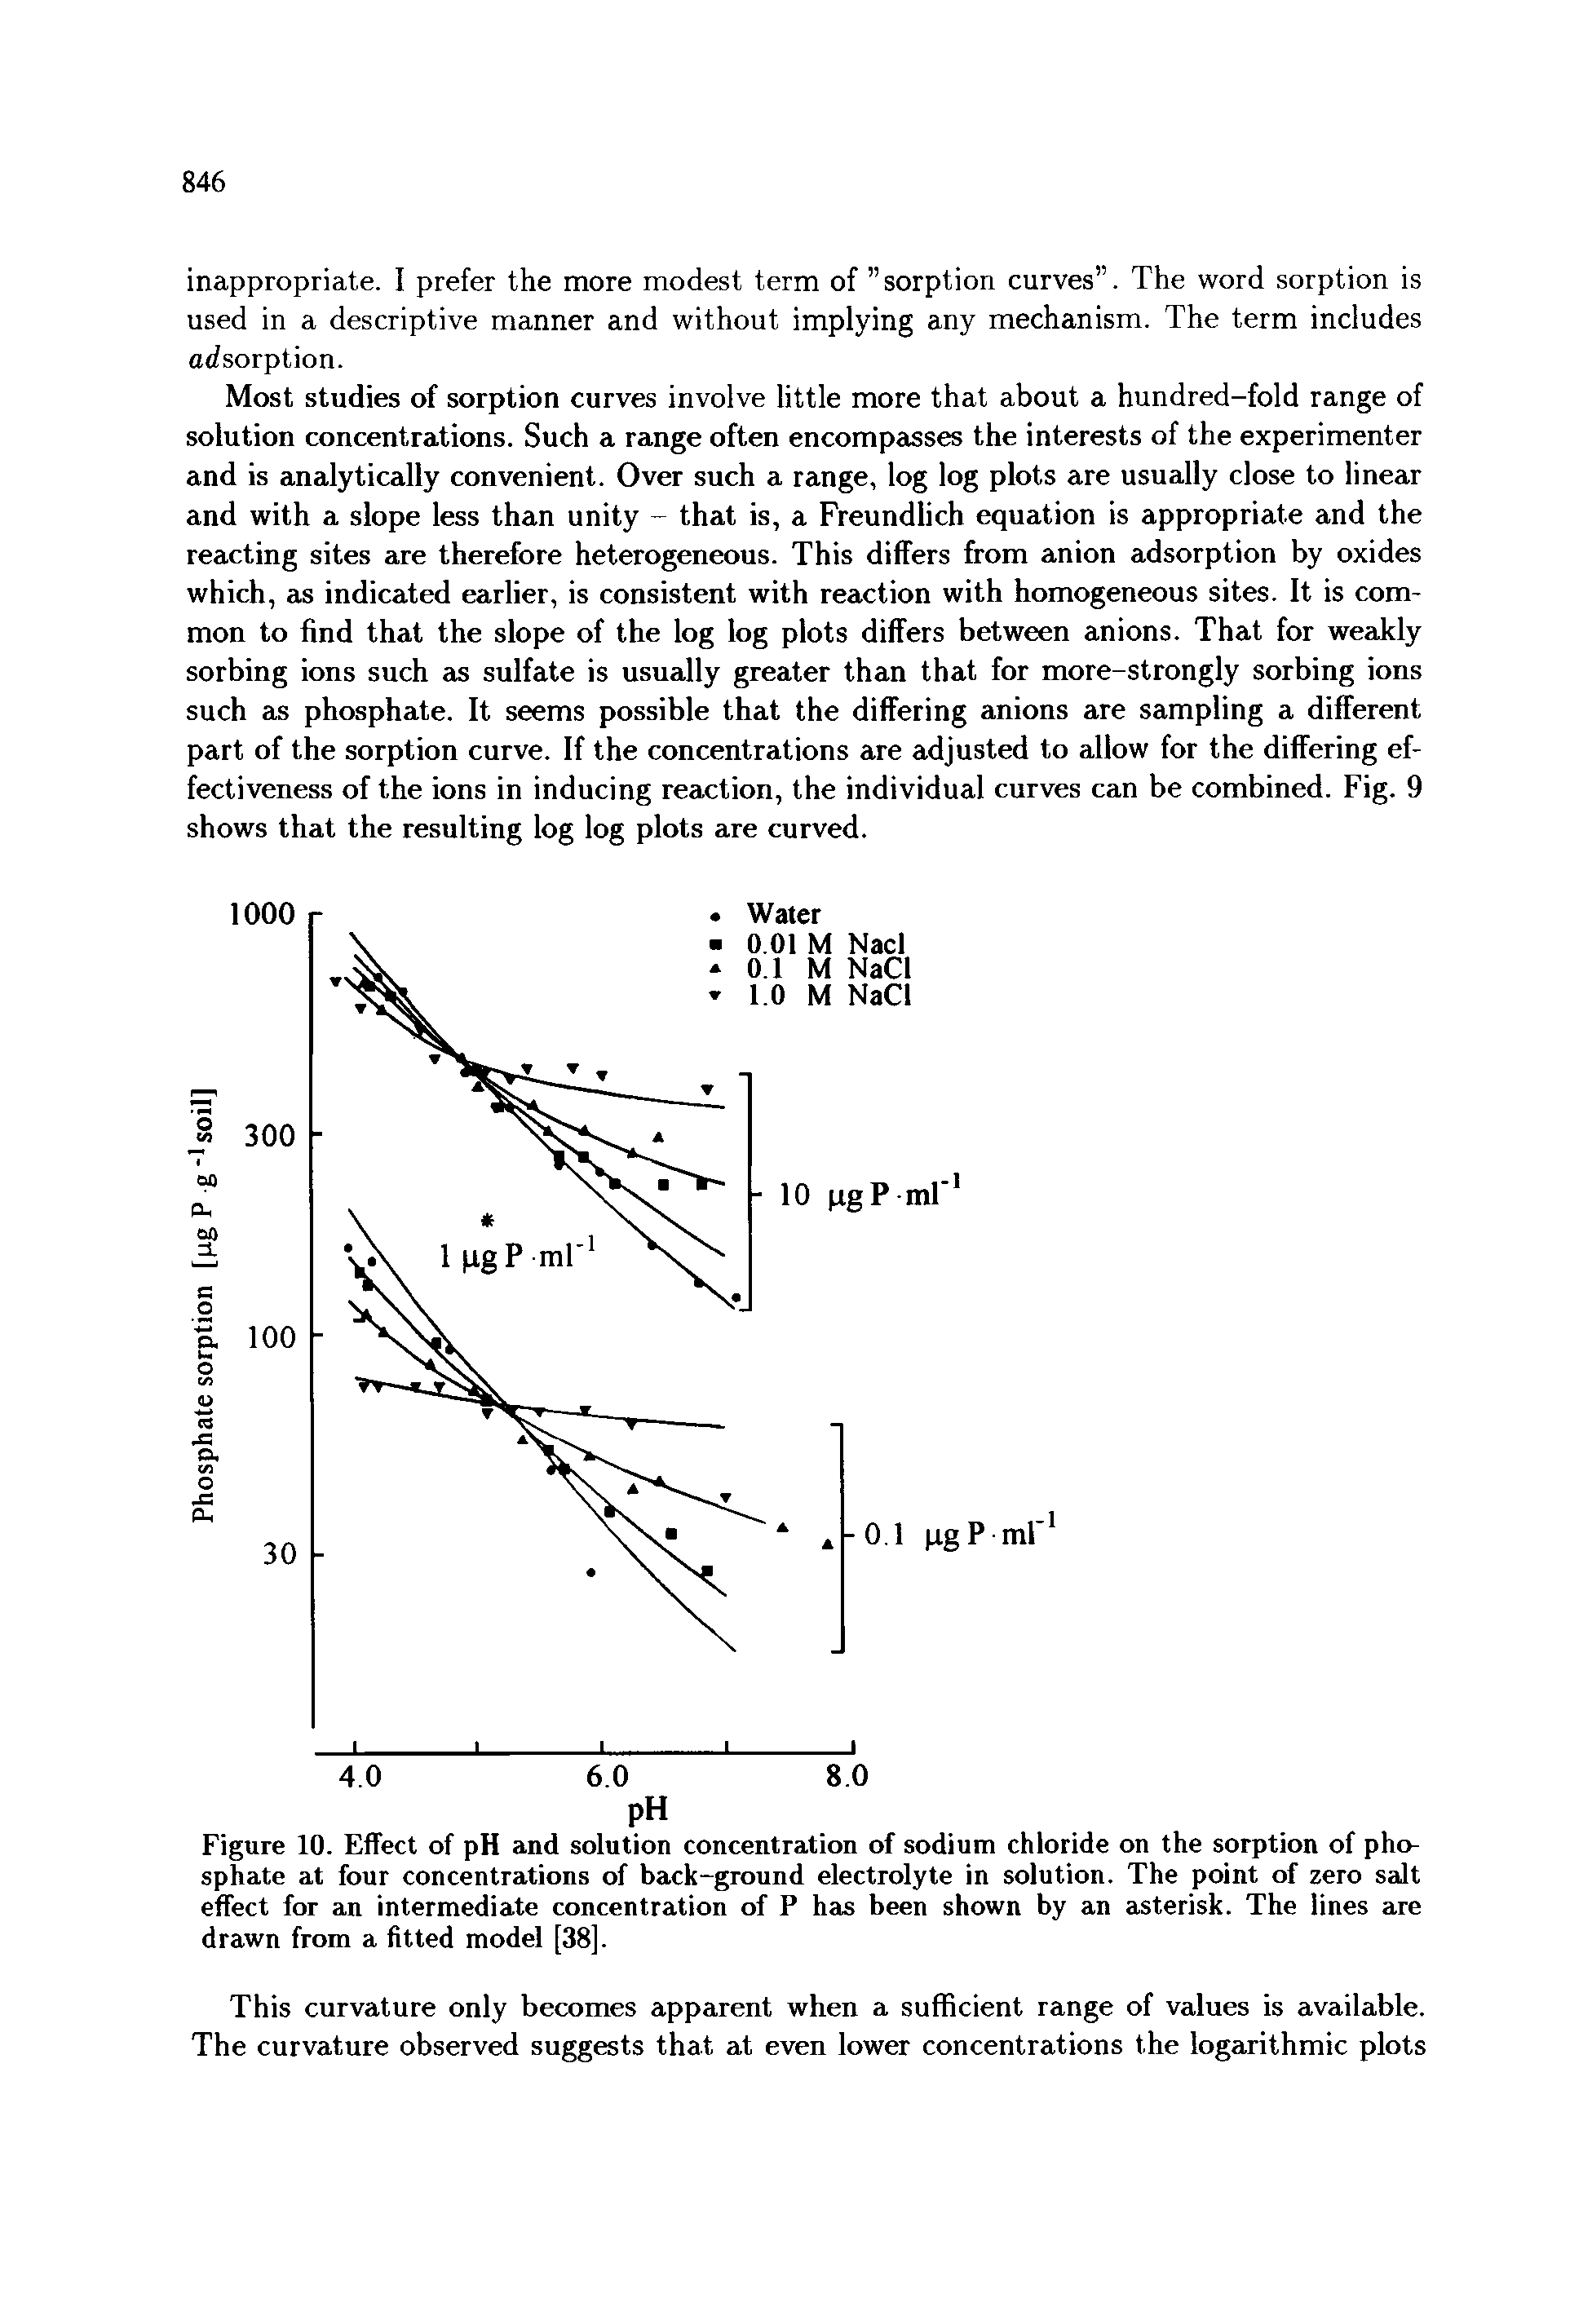 Figure 10. Effect of pH and solution concentration of sodium chloride on the sorption of phosphate at four concentrations of back-ground electrolyte in solution. The point of zero salt effect for an intermediate concentration of P has been shown by an asterisk. The lines are drawn from a fitted model [38].